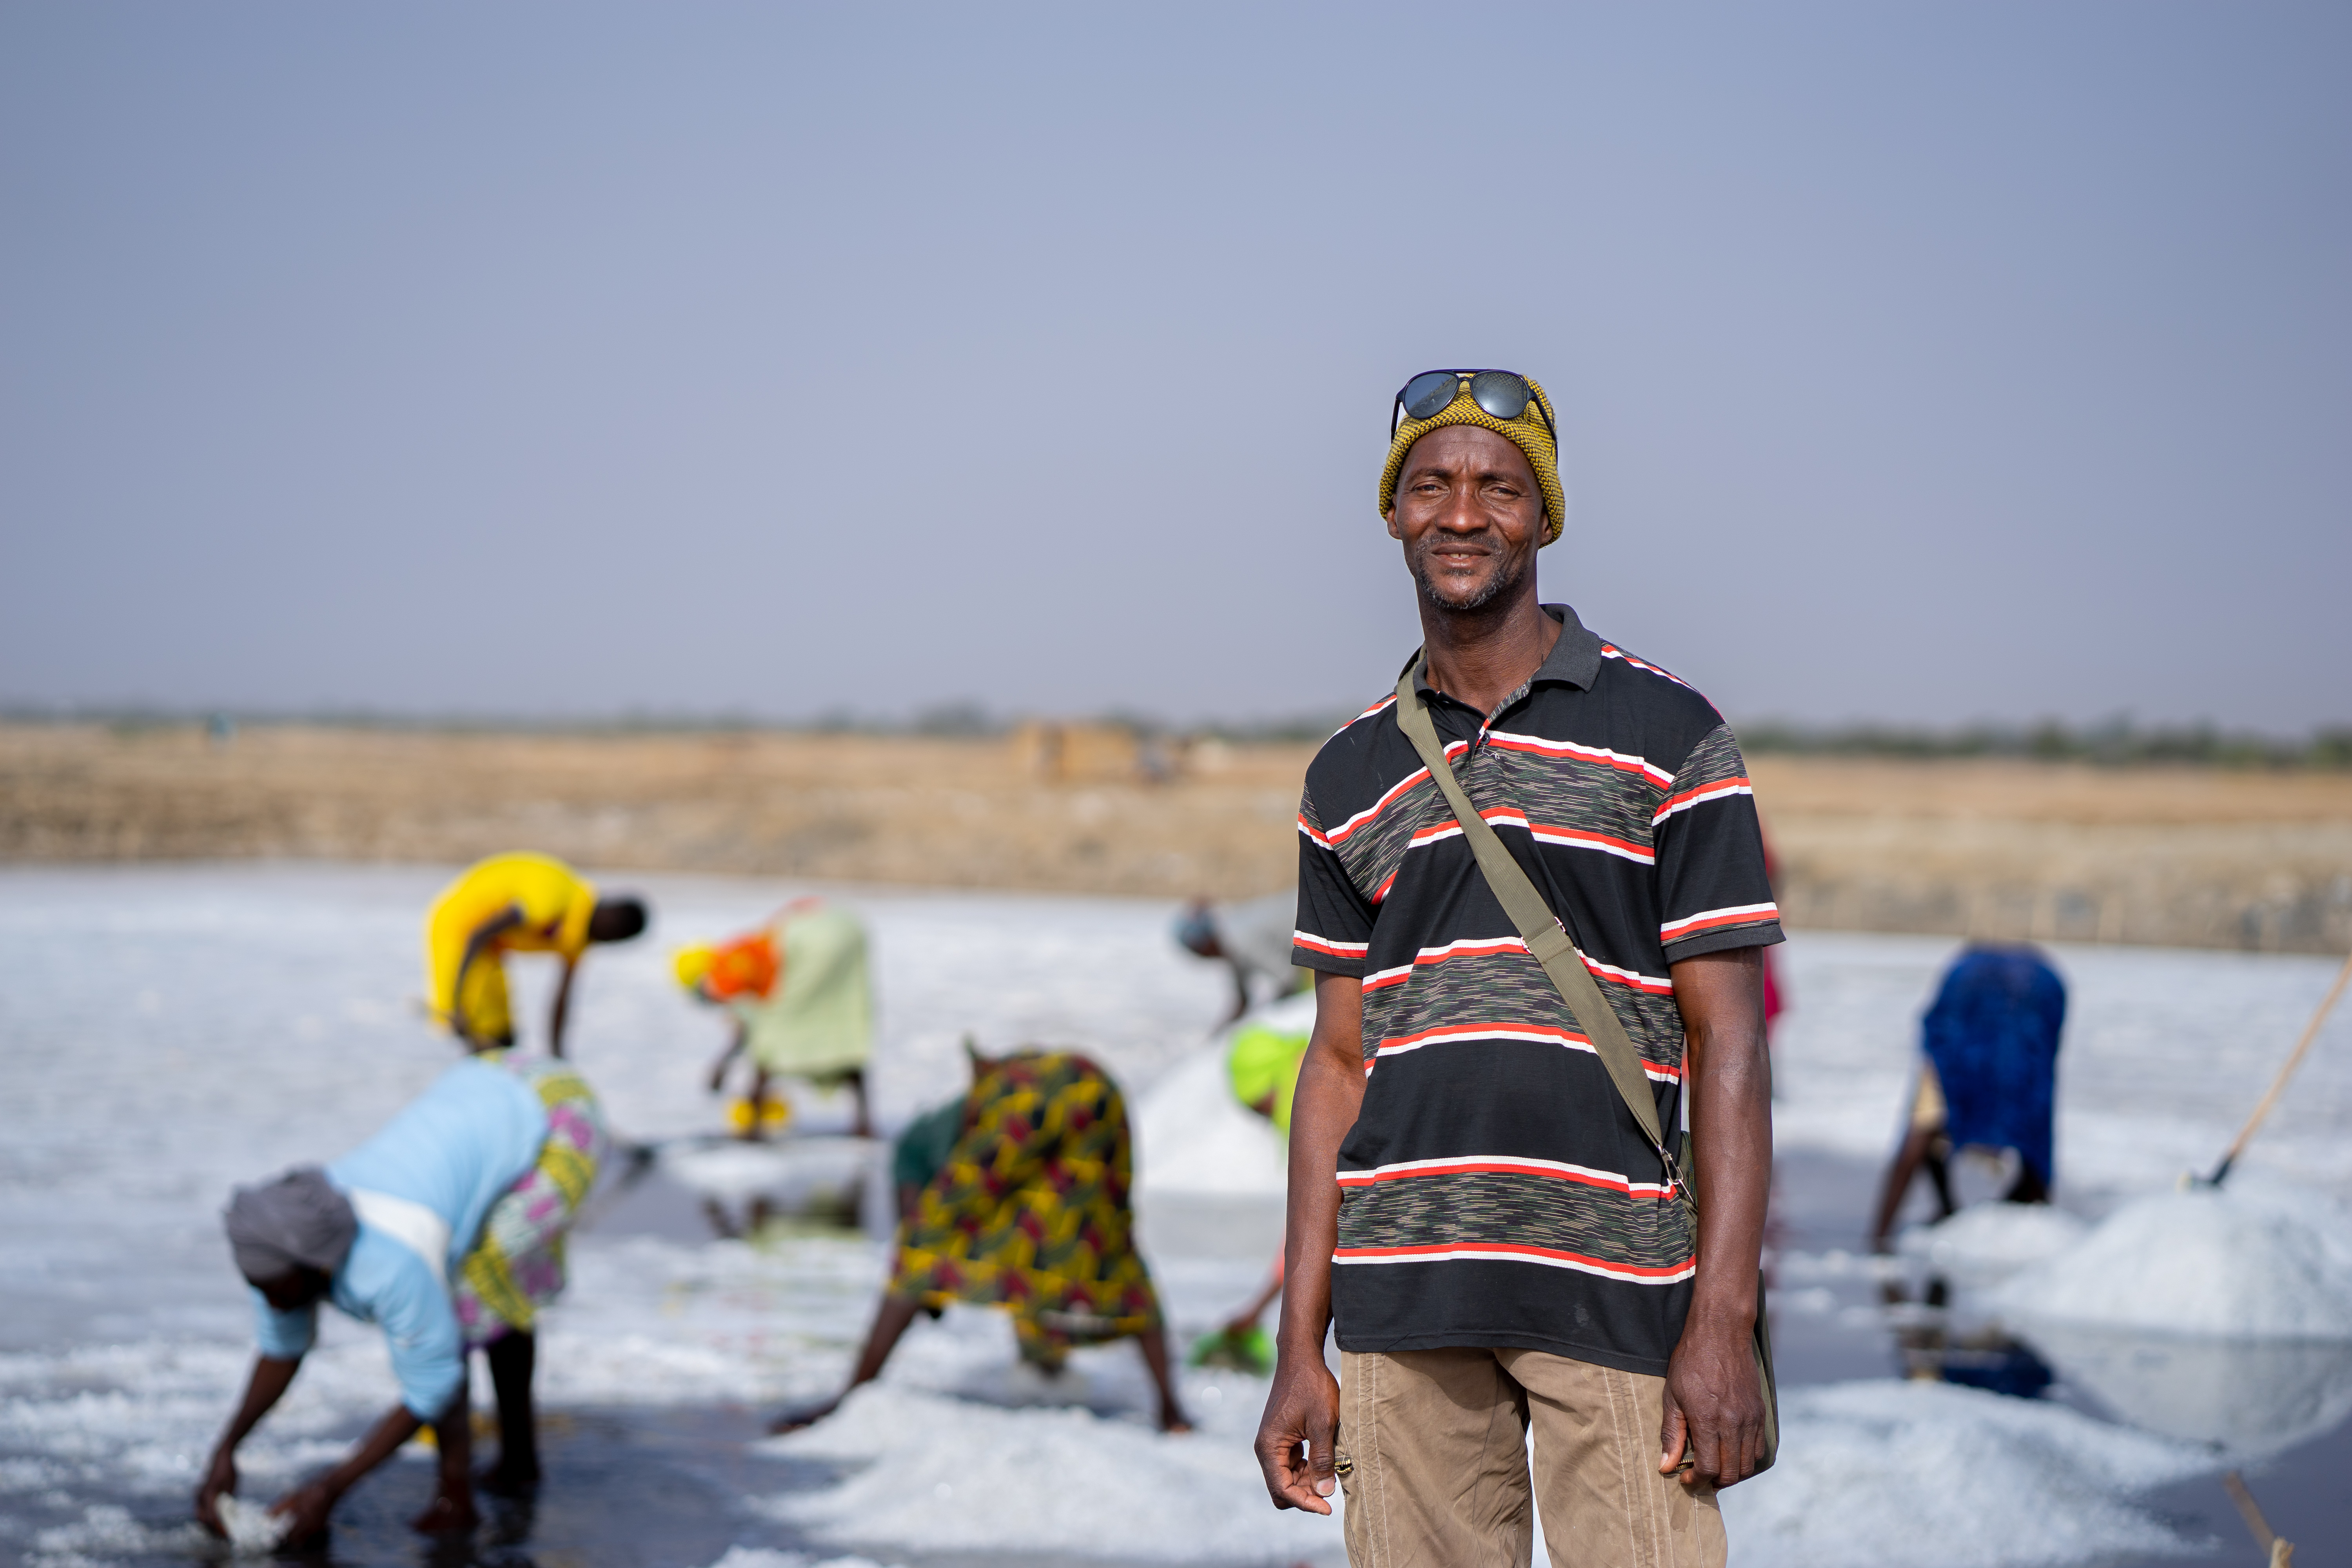 A man looks to the camera with the background of people working on a salt field.